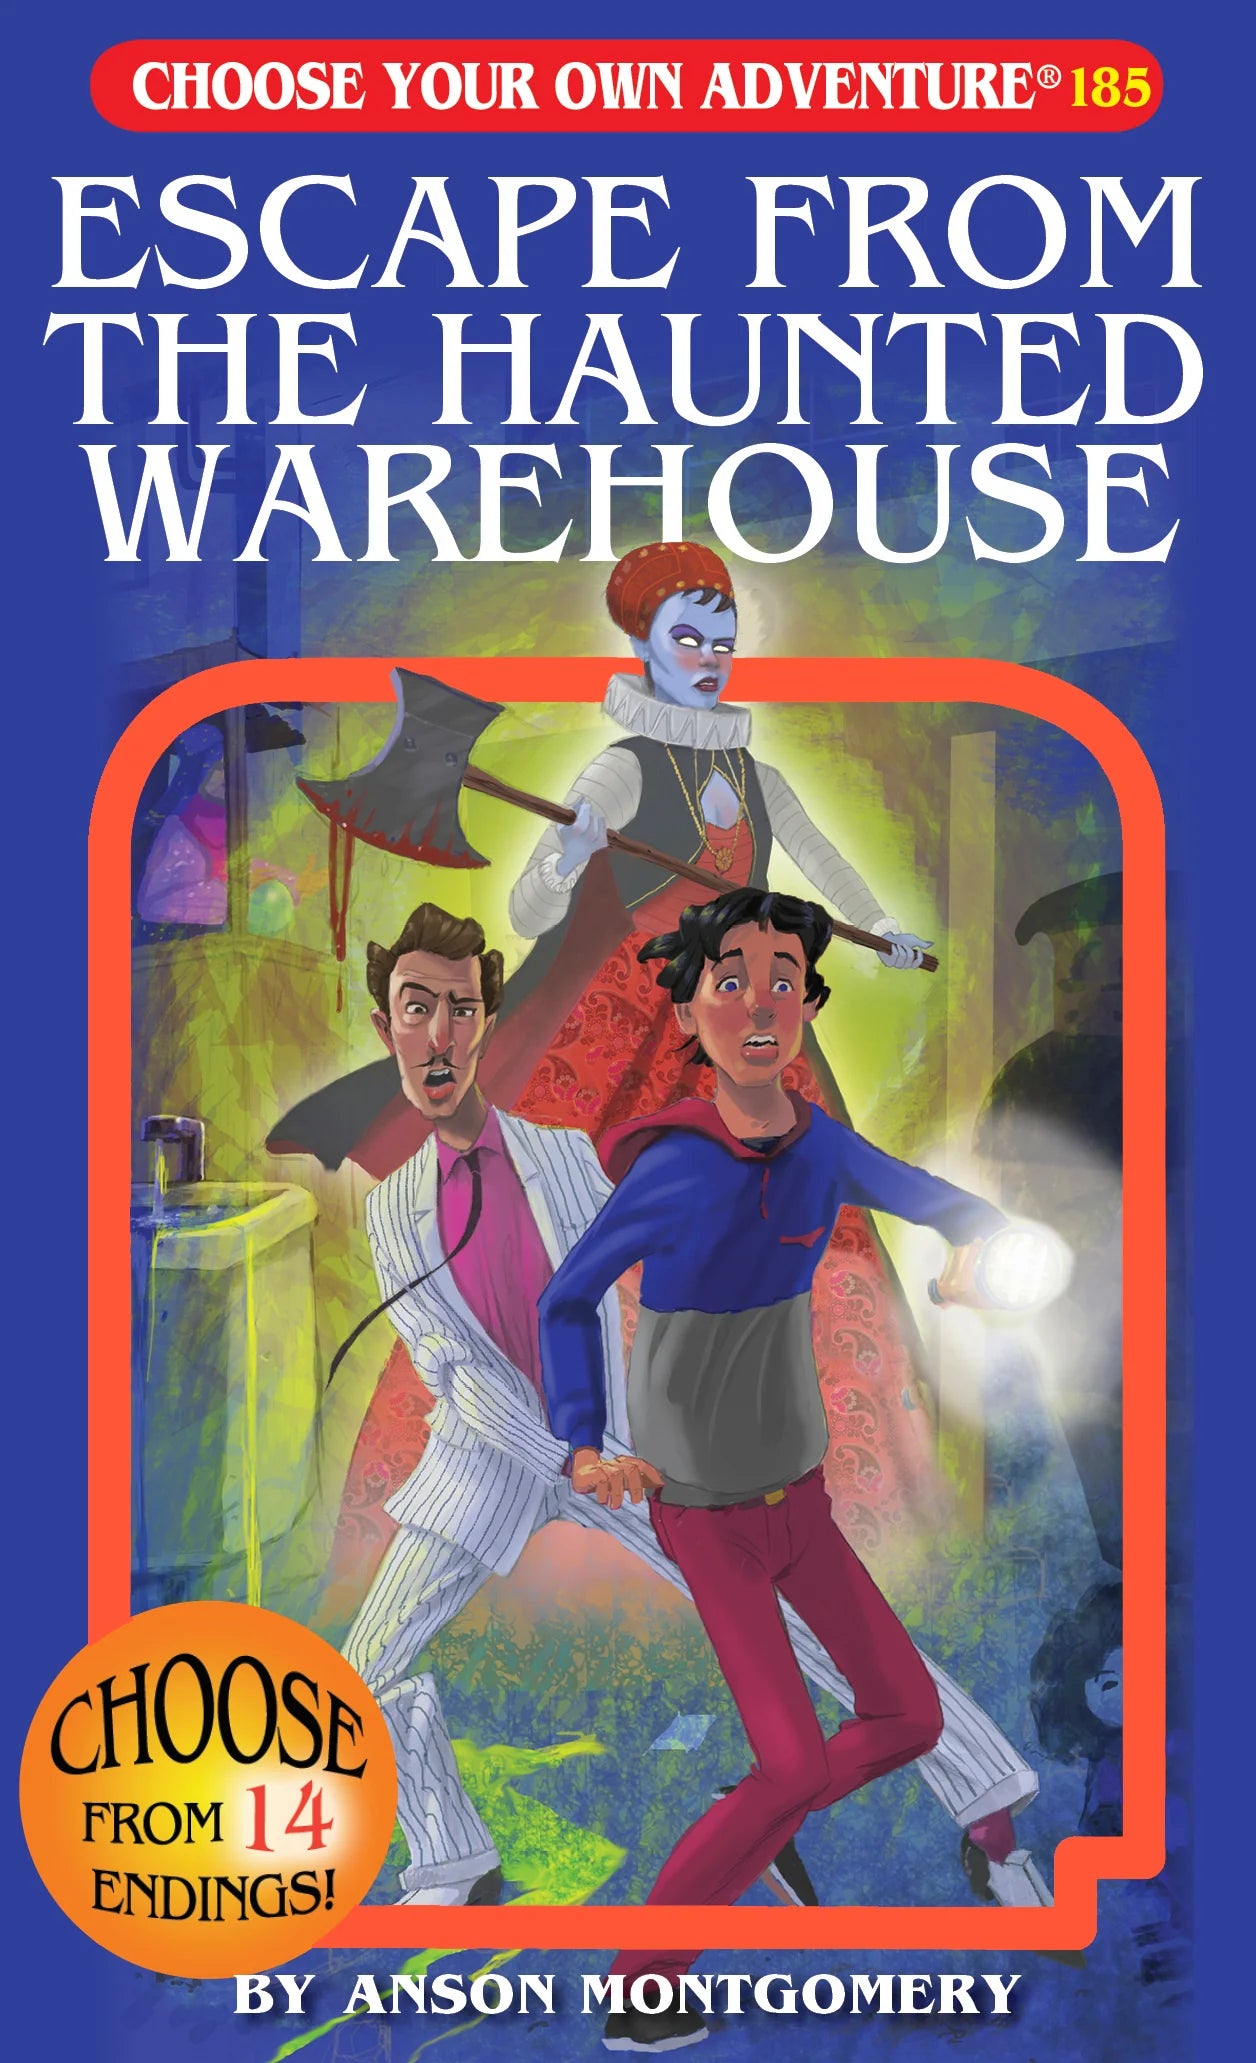 Choose Your Own Adventure: Escape From The Haunted Warehouse